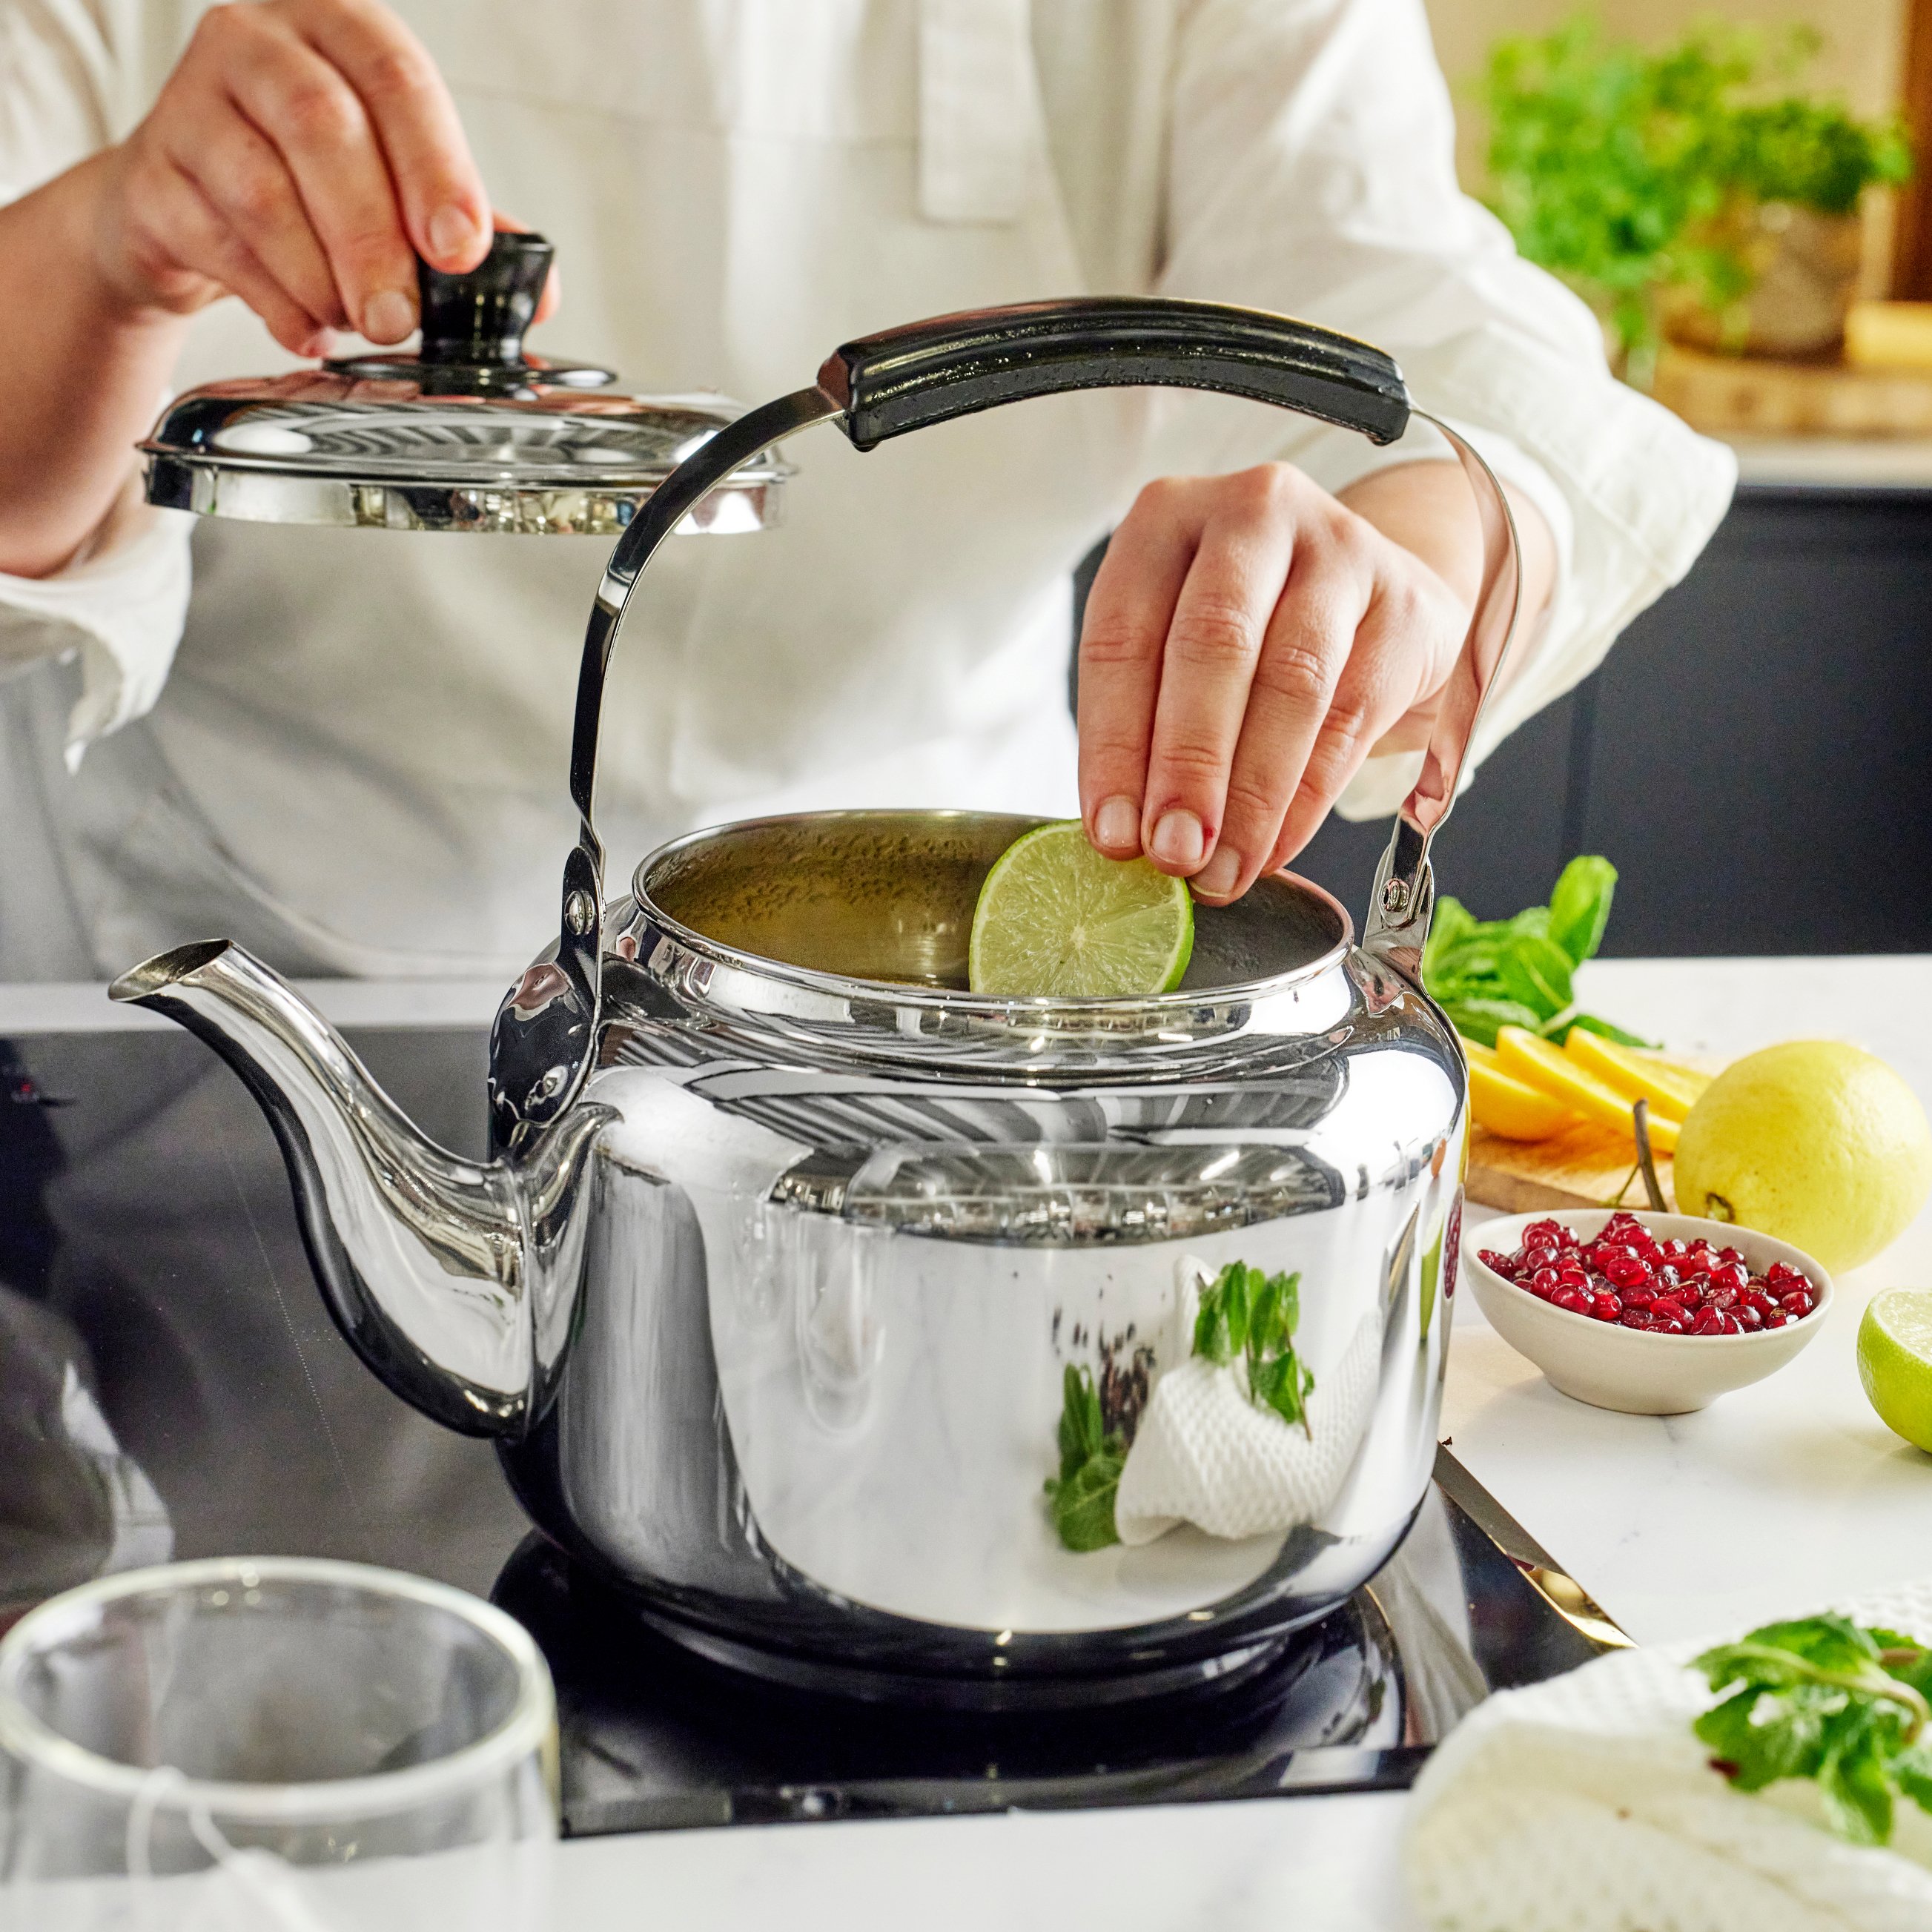 https://www.zwilling.com/on/demandware.static/-/Sites-zwilling-us-Library/default/dw33d77e8b/images/product-content/masonry-content/demeyere/cookware/specialties/DE_Resto_Tea_Kettle_4.jpg